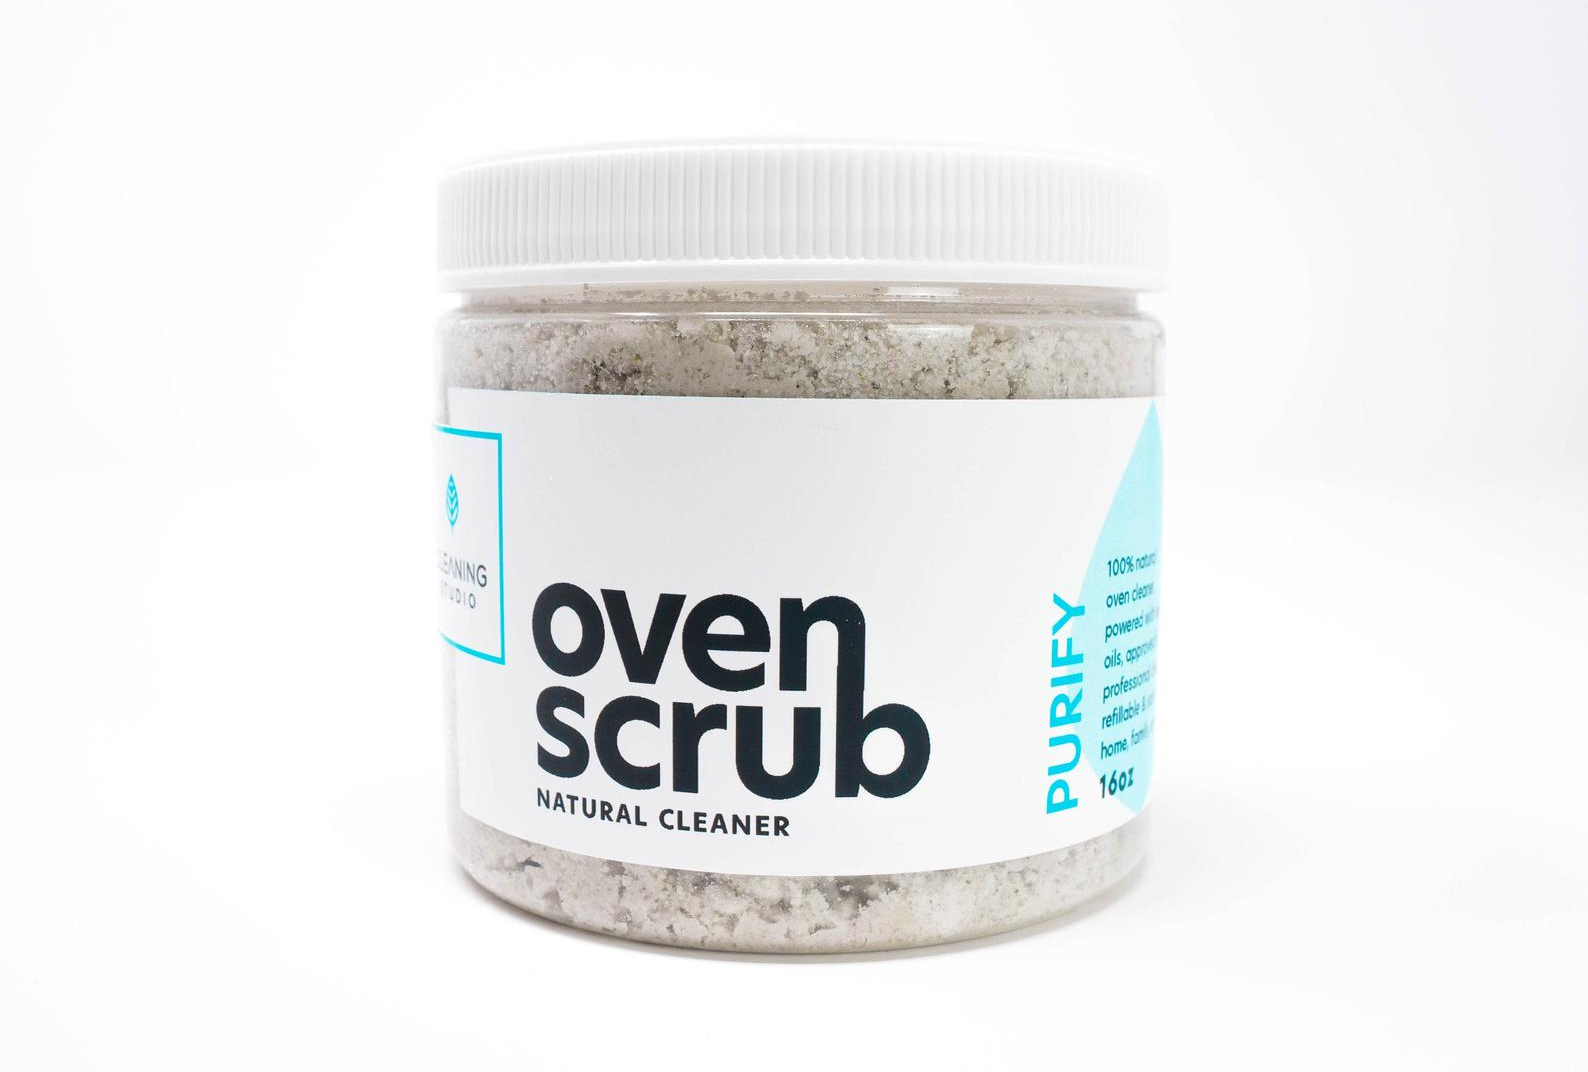 tub of oven scrub natural cleaner